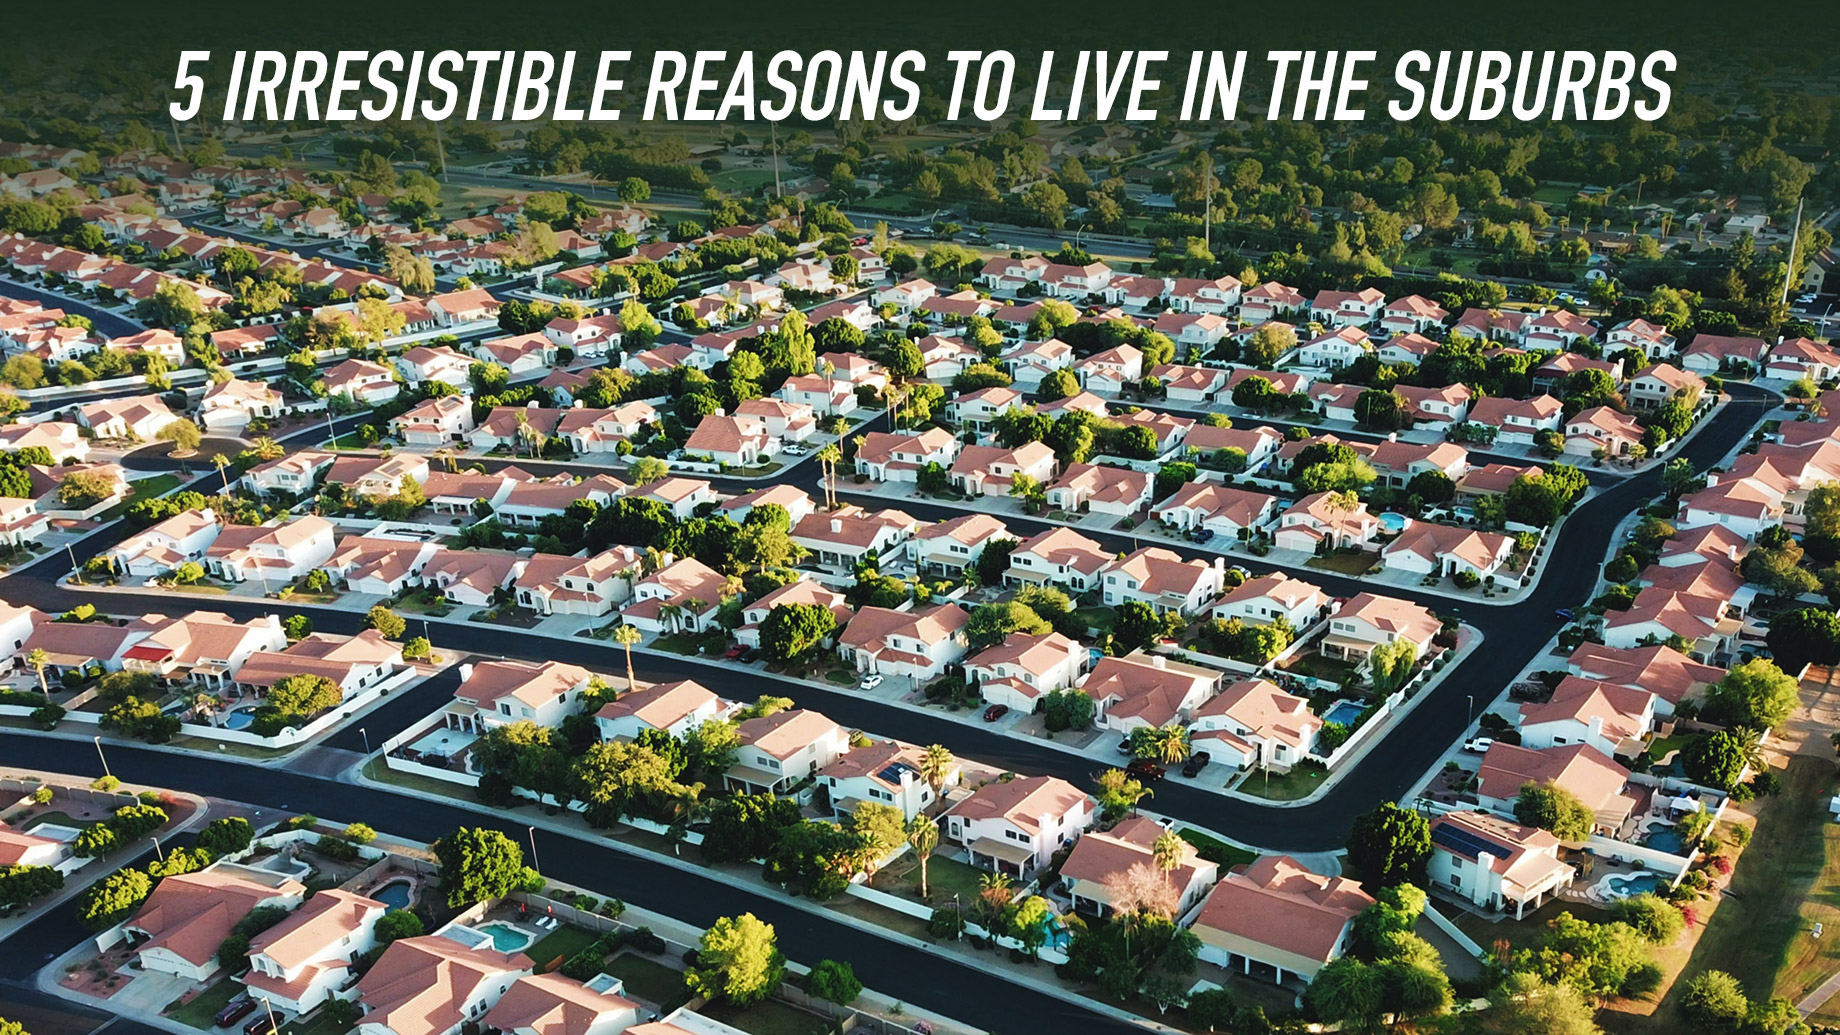 Bye Bye City Life - 5 Irresistible Reasons to Live in the Suburbs